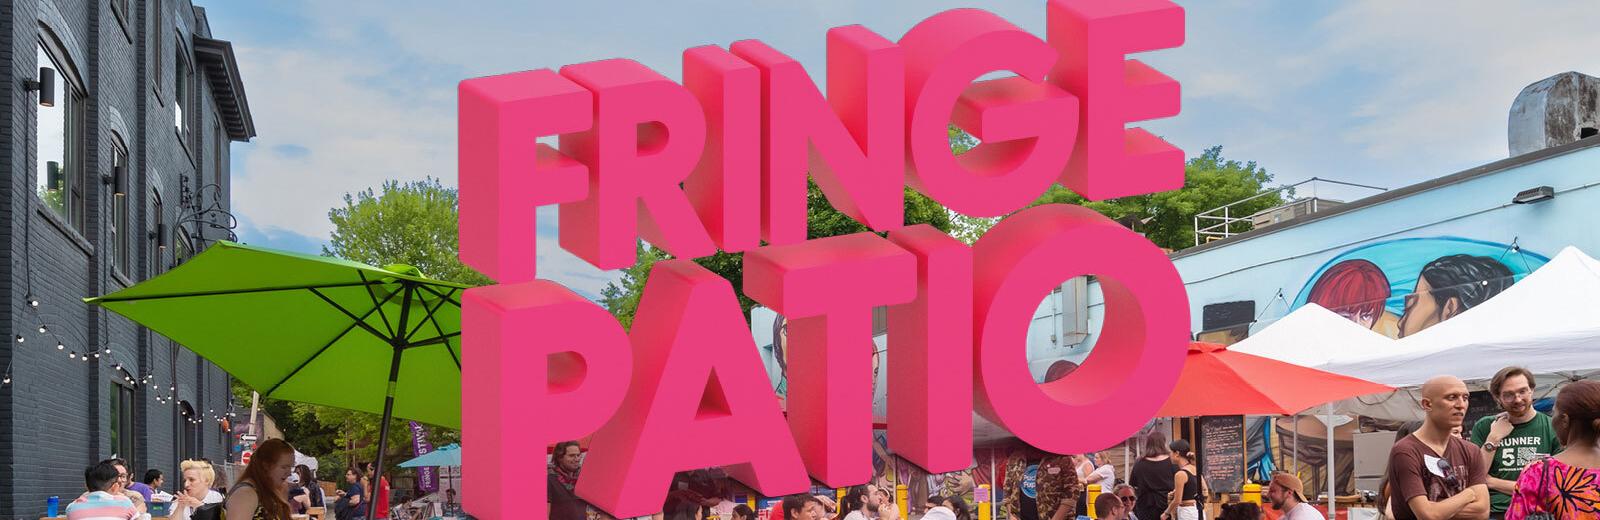 "Fringe Patio" in pink block letters, overlayed on a picture of the patio with lots of mingling patrons